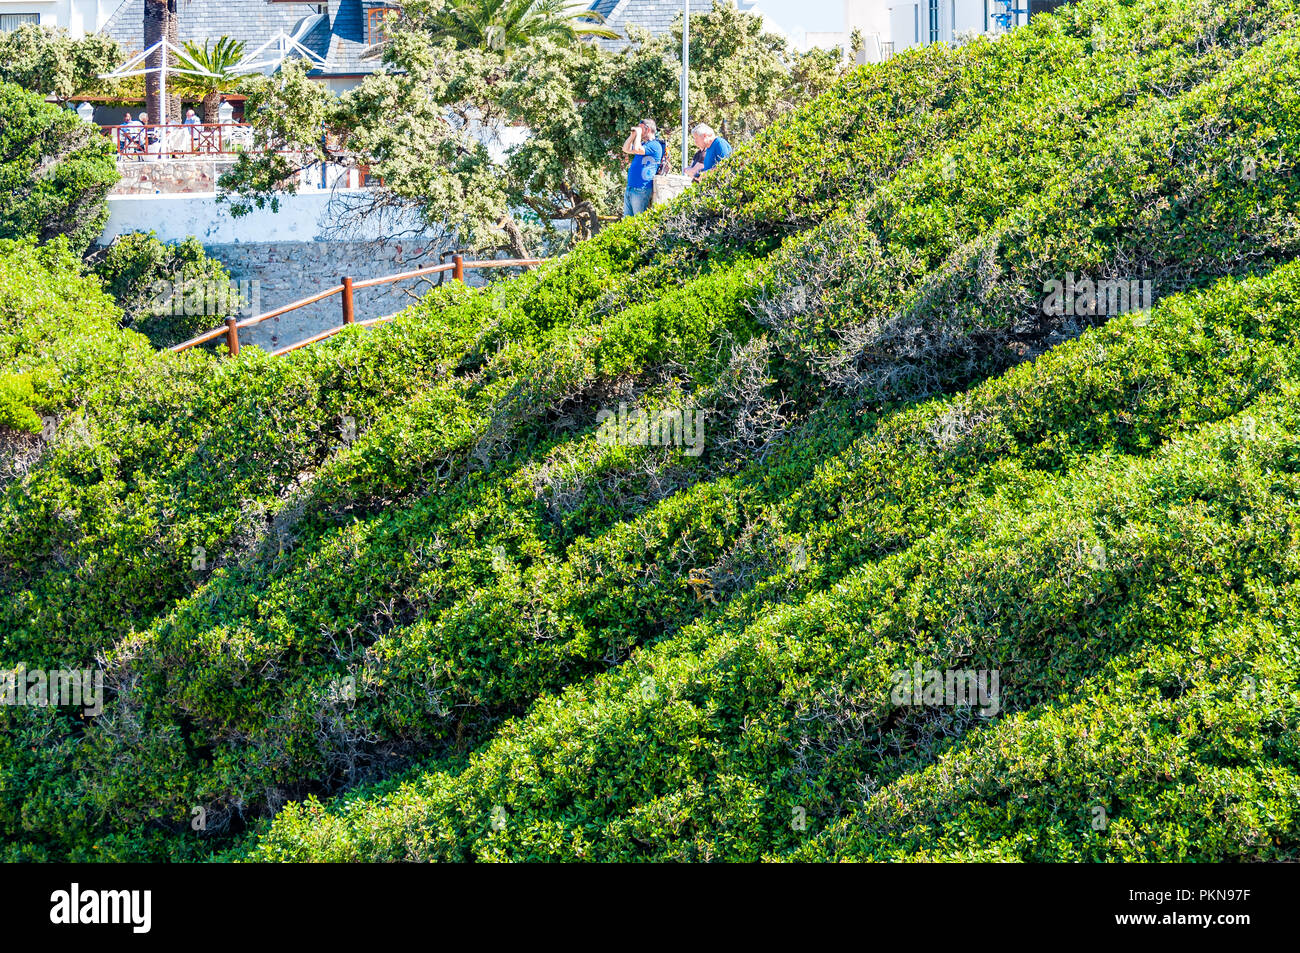 People whale watching from shrubs bushes lined hillside in Hermanus, South Africa Stock Photo